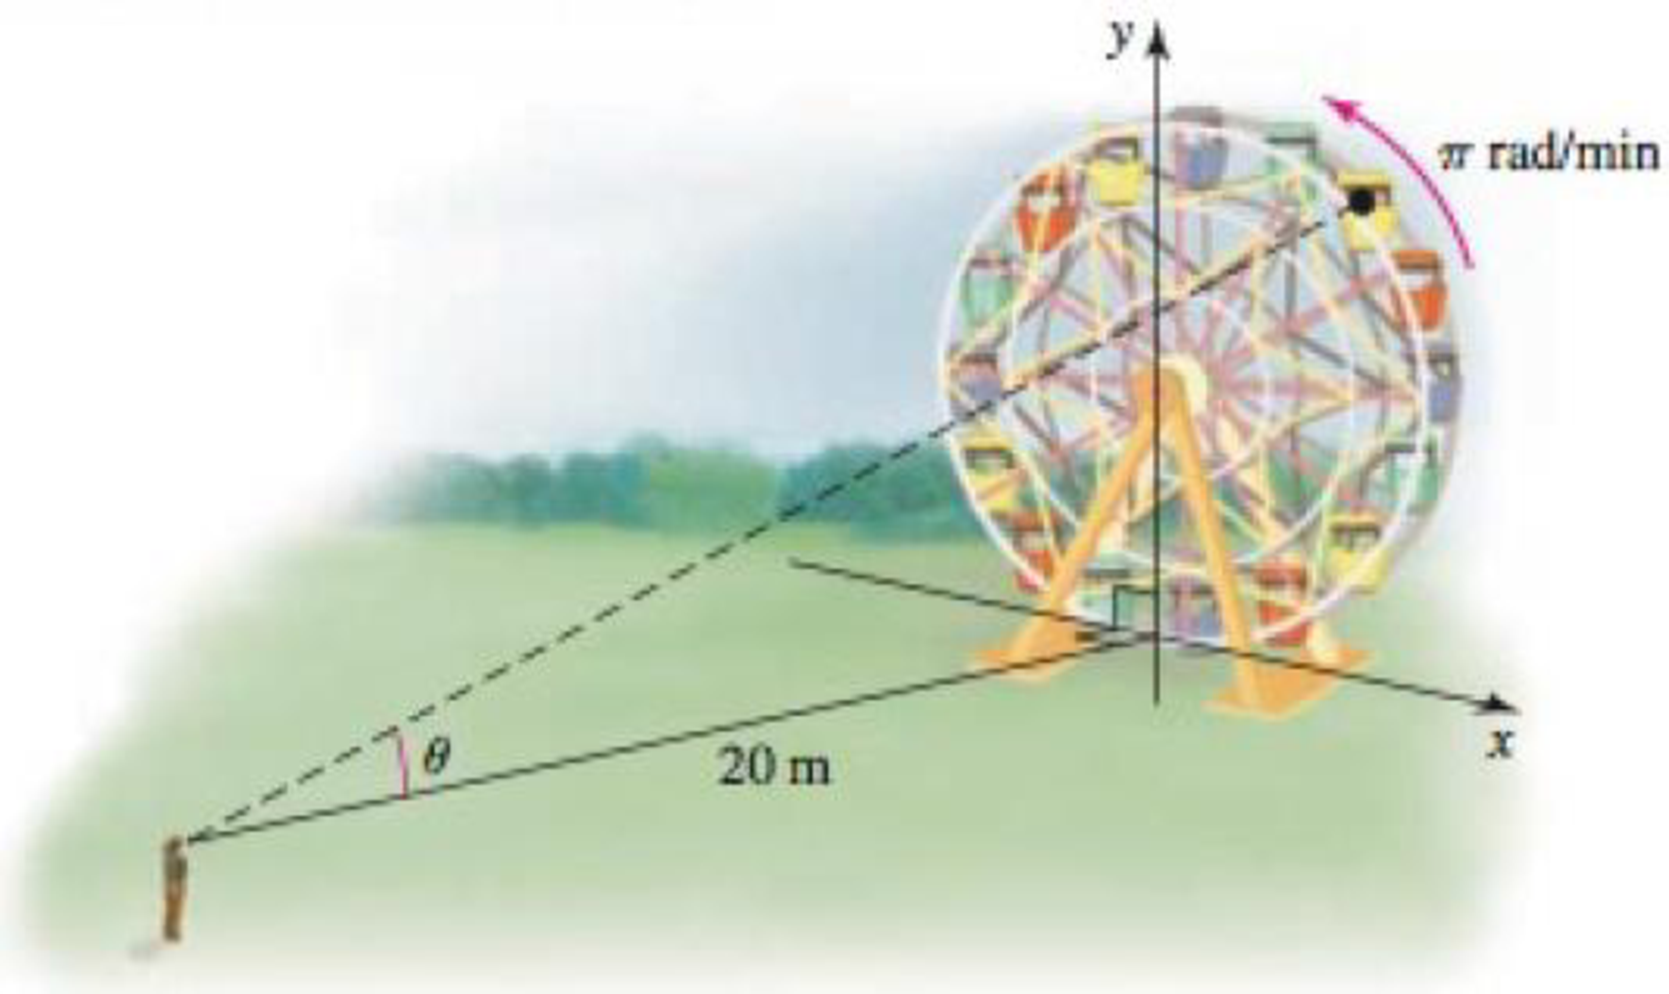 Chapter 4.5, Problem 63E, Watching a Ferris wheel An observer stands 20 m from the bottom of a Ferris wheel on a line that is 